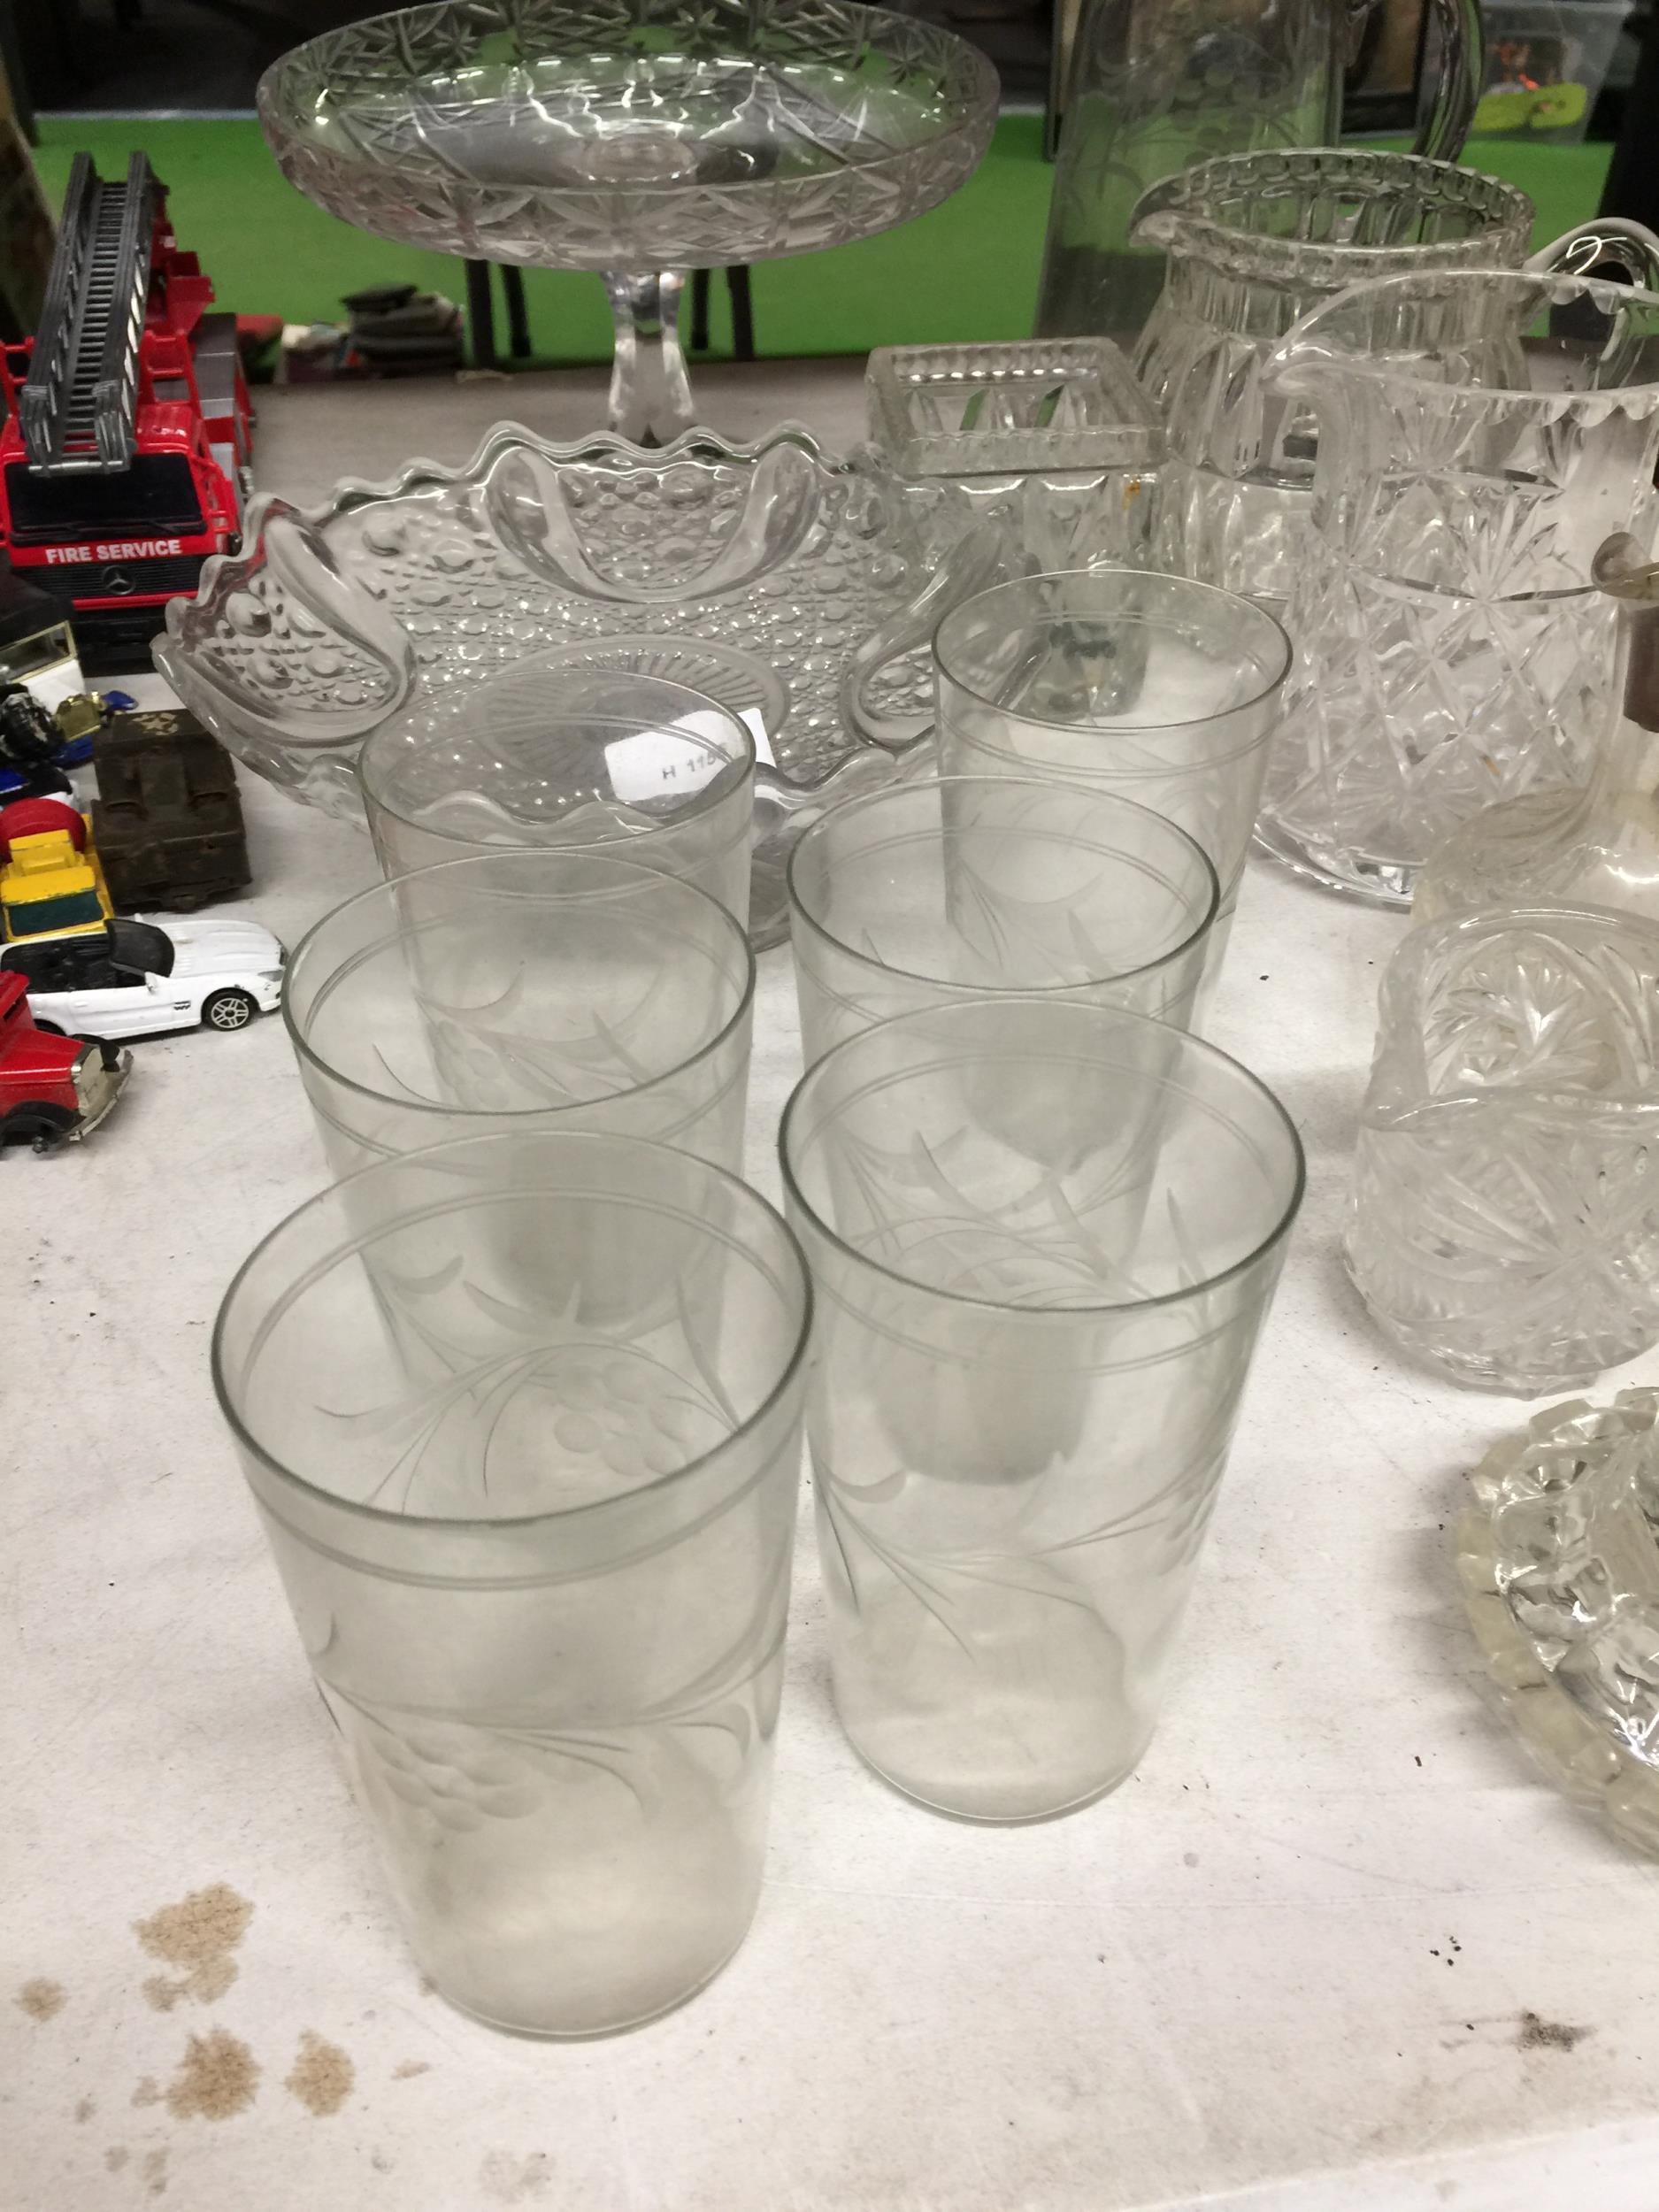 A QUANTITY OF GLASSWARE INCLUDING ETCHED TUMBLERS, CAKE STANDS, JUGS, ETC - Image 2 of 6